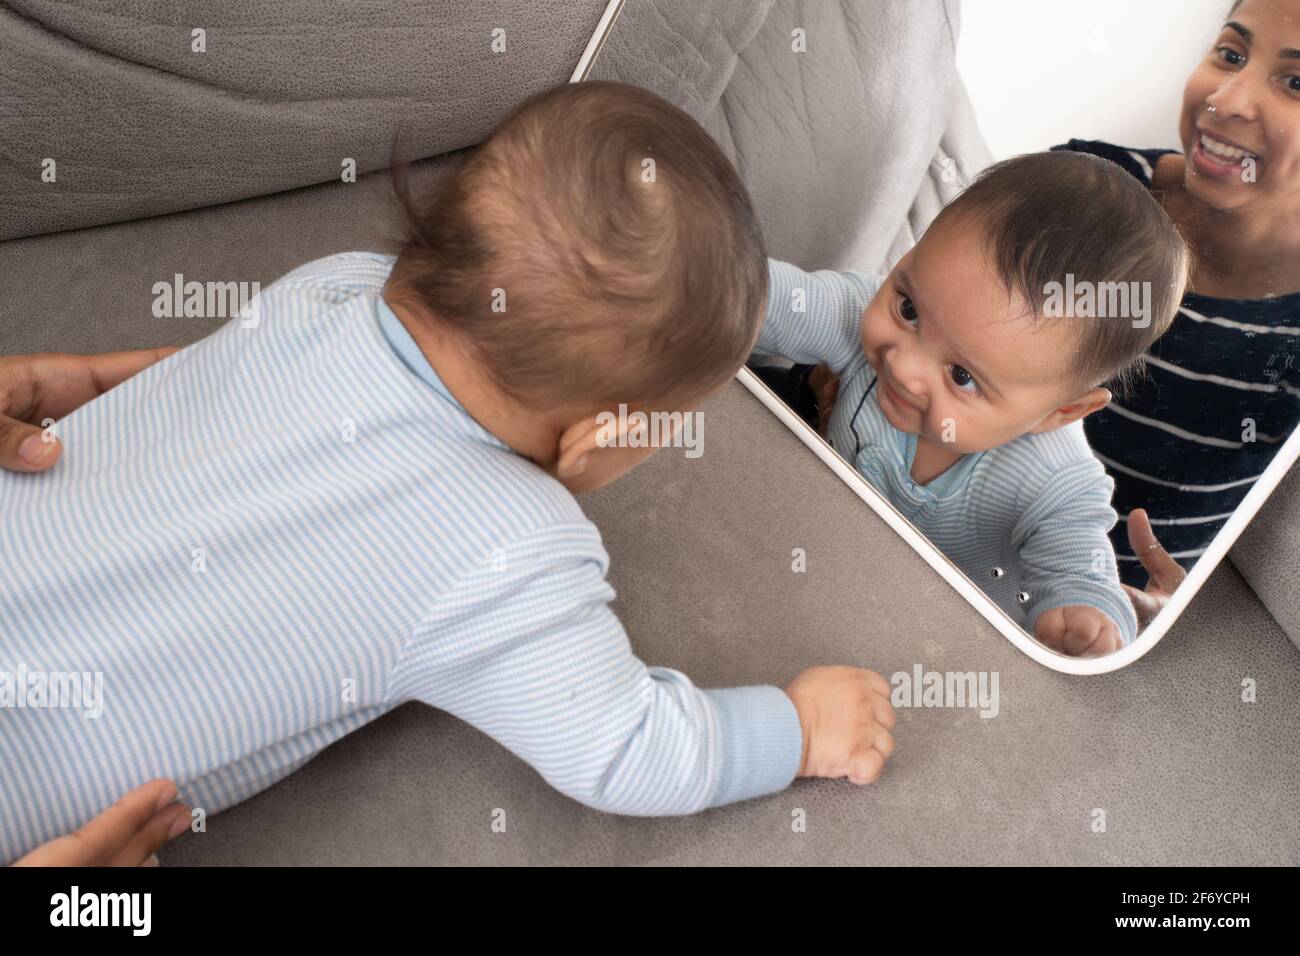 4 month old baby boy looking at self in mirror, mother in background Stock Photo